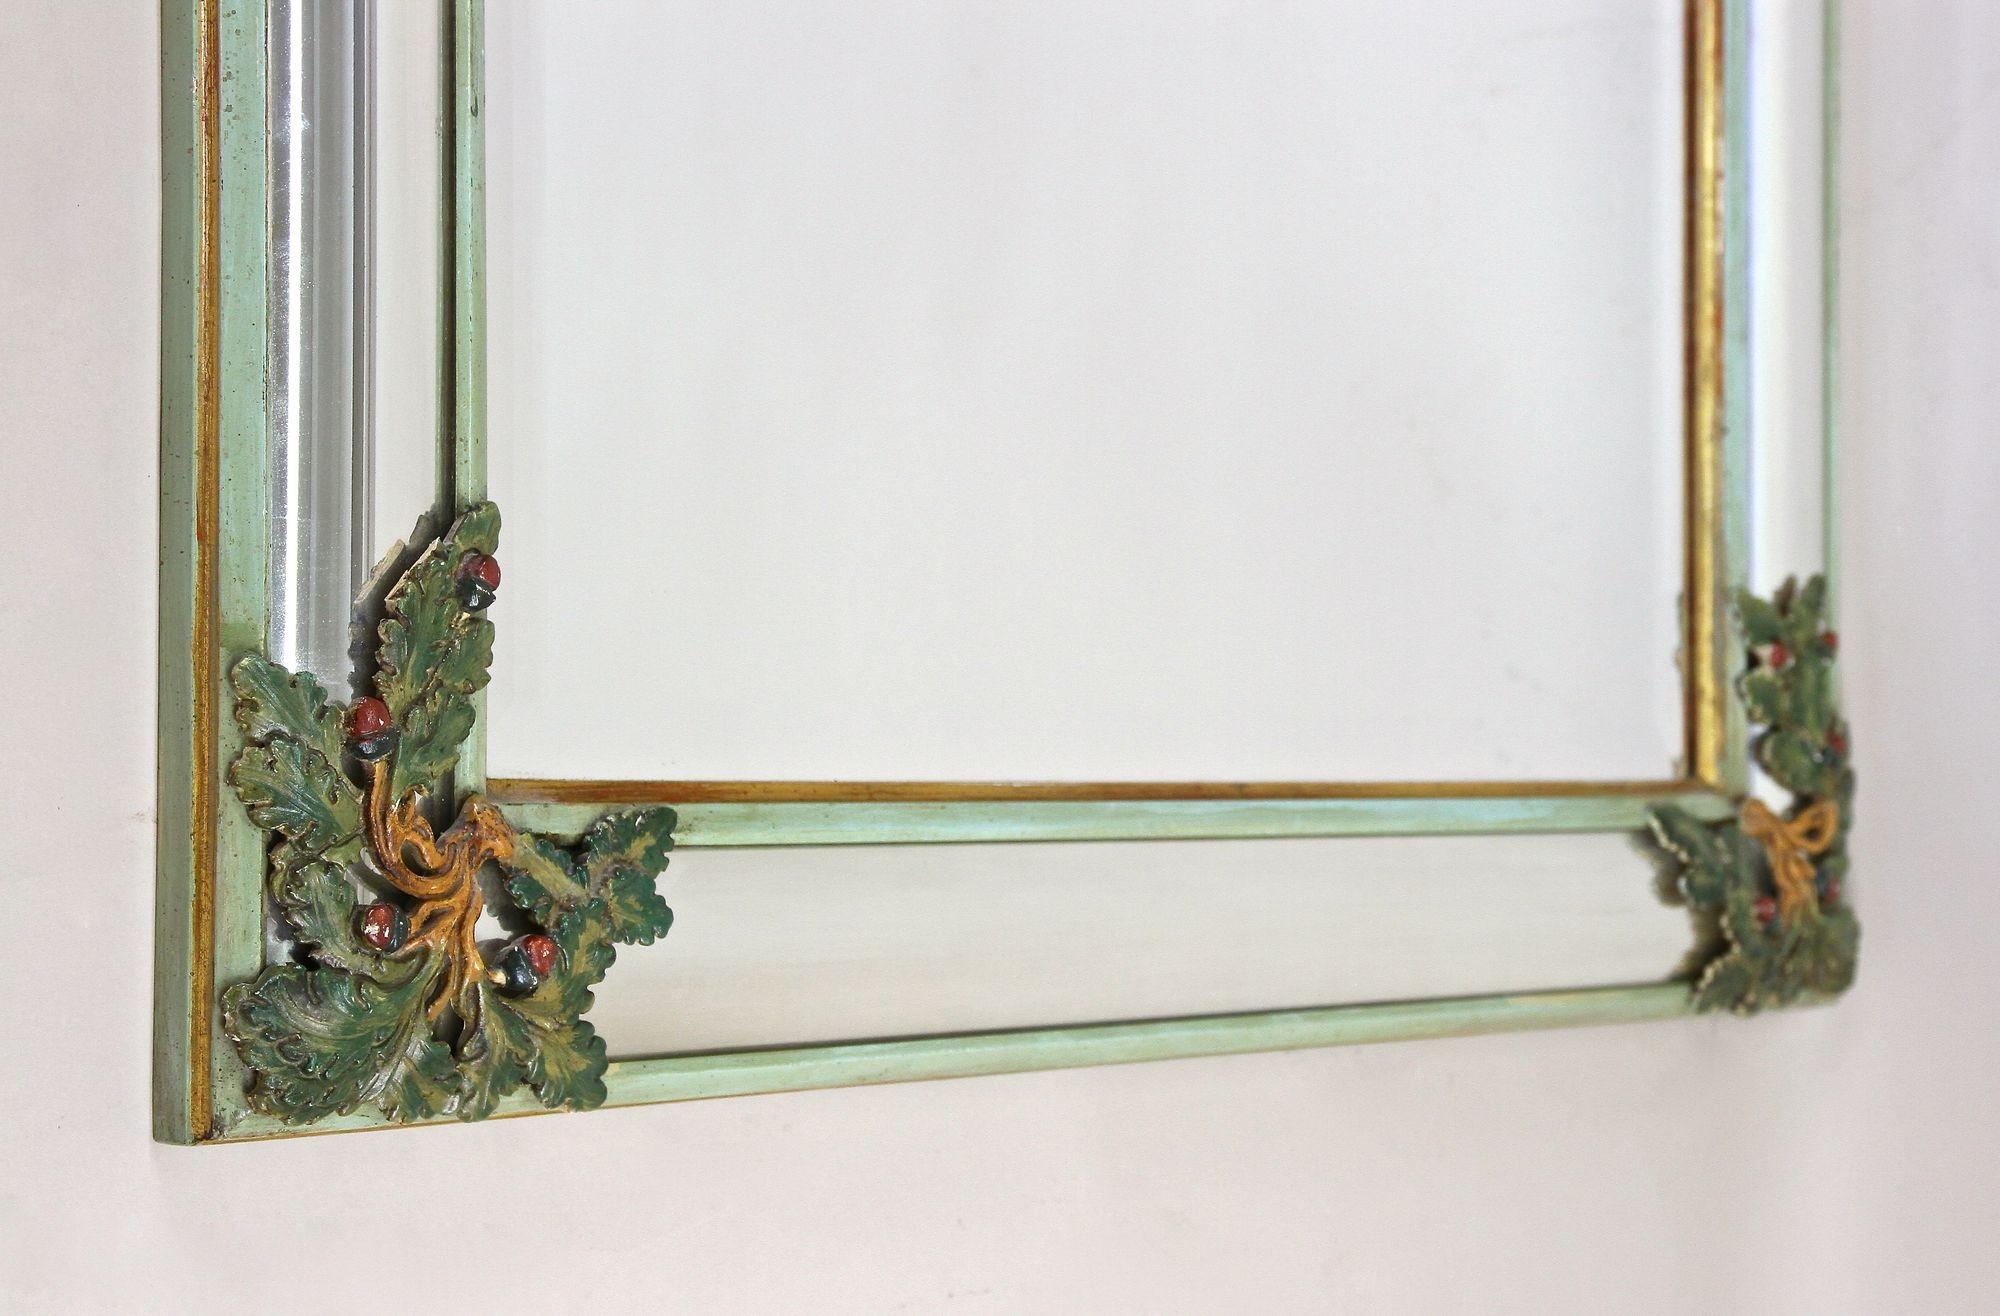 Gilt Midcentury Wall Mirror with Oak Leaves/ Acorn Carvings, Italy circa 1960 For Sale